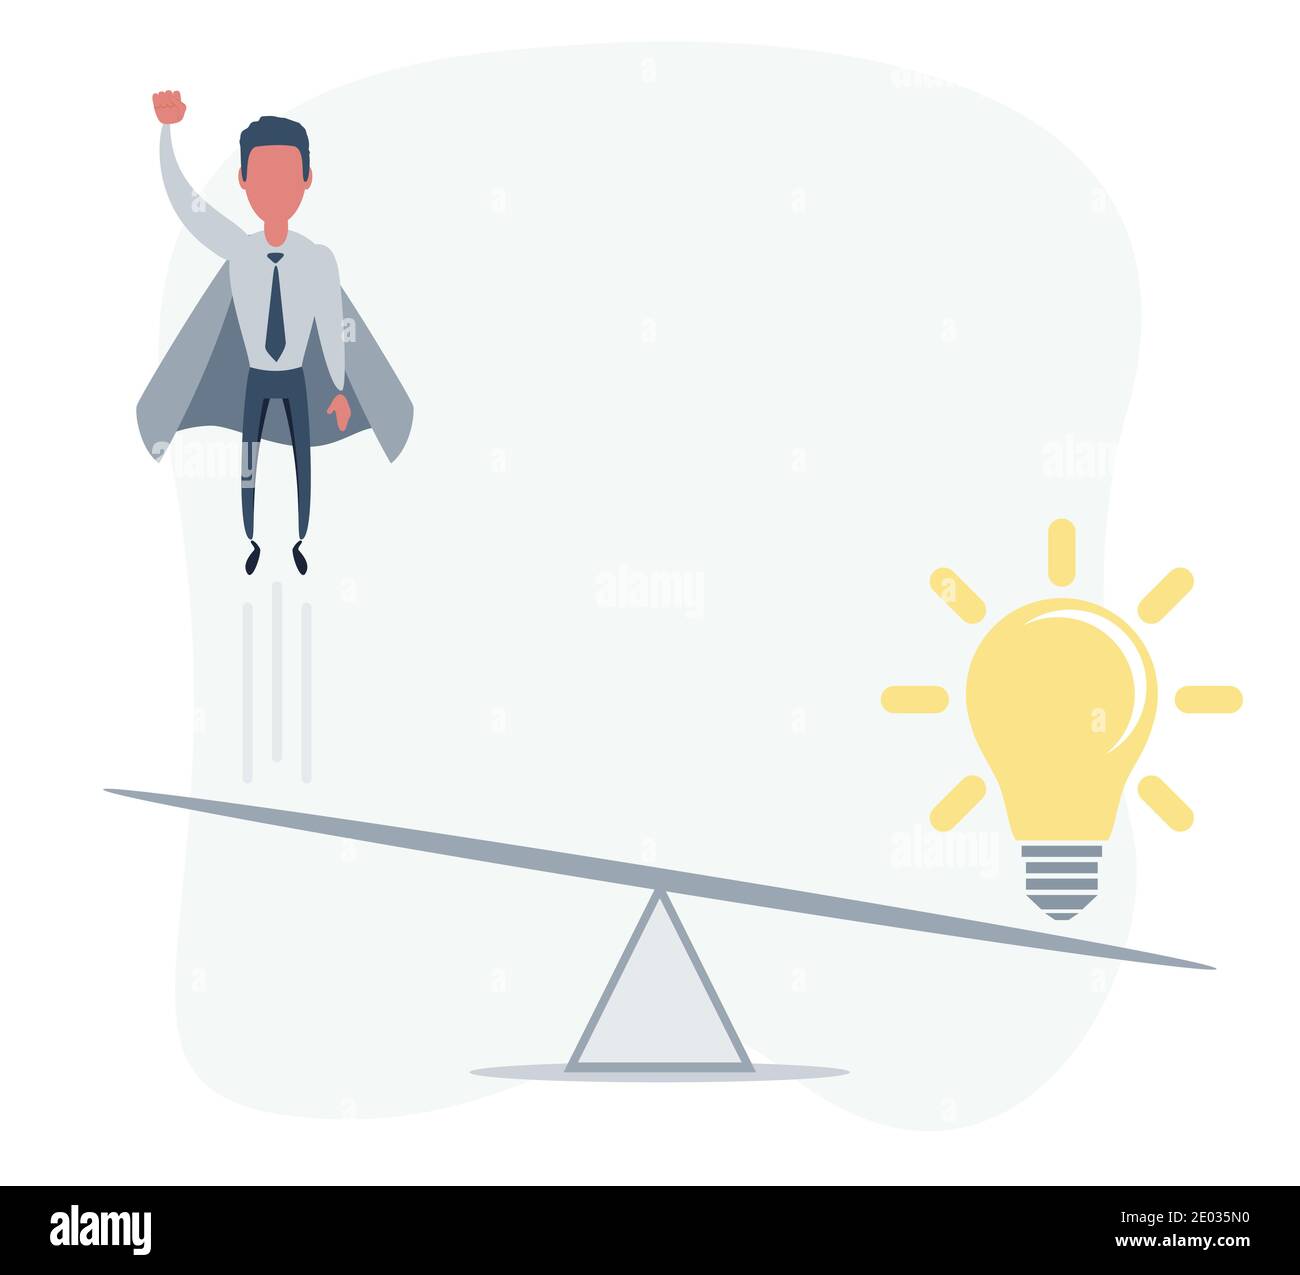 Business startup concept. Vector illustration with a businessman flying high up and a lightbulb. Stock Vector